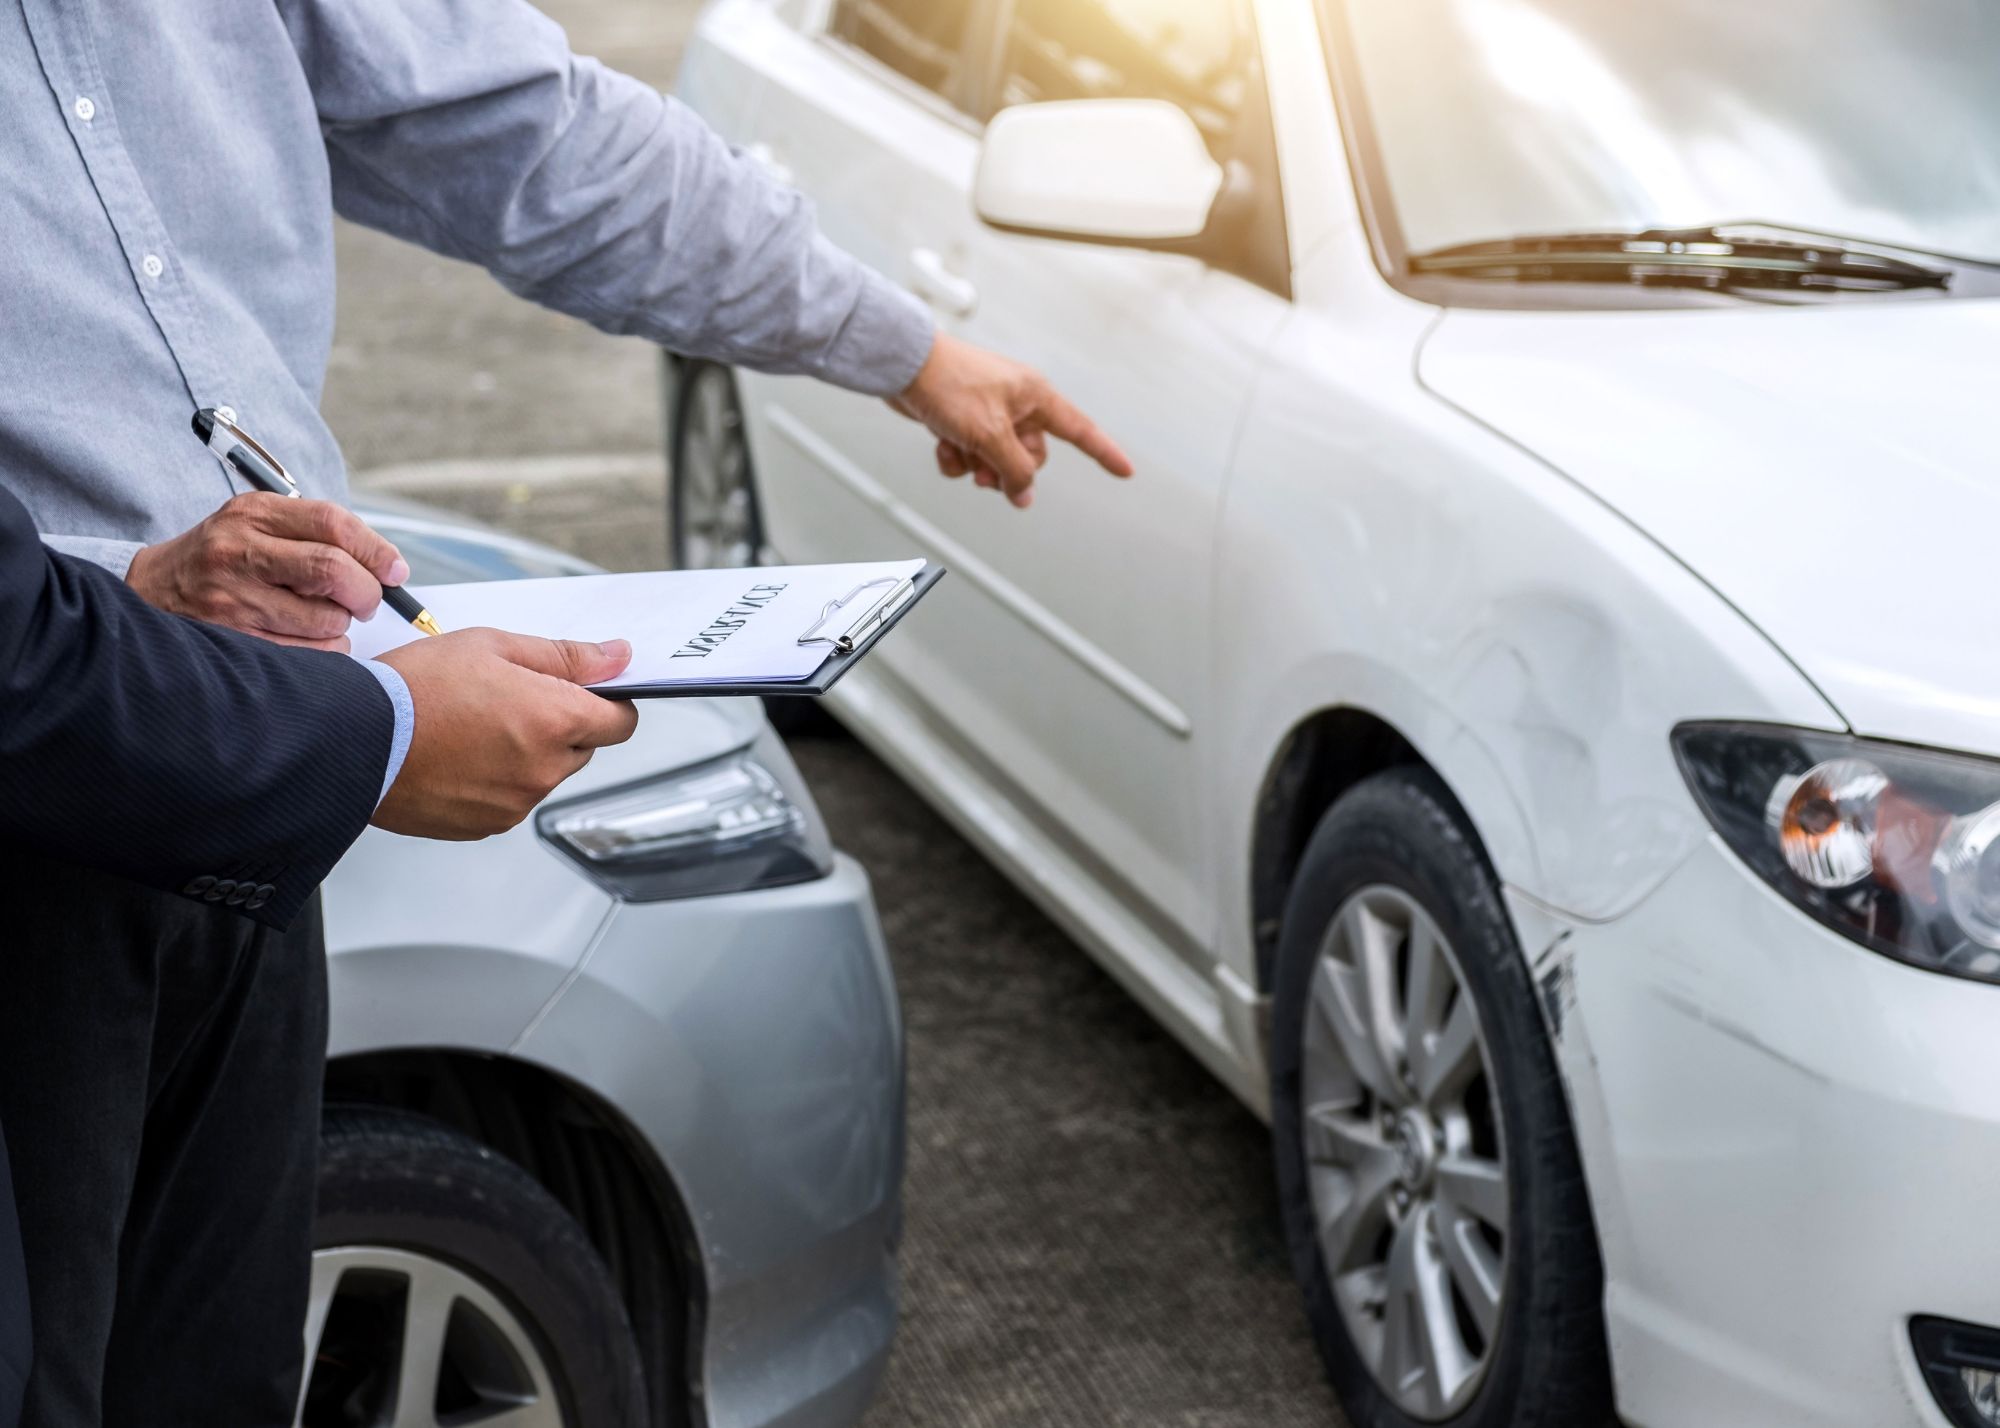 SR22 state car coverage is a type of auto insurance required for high-risk drivers in order to maintain their driving privileges. It is commonly used in Claymont, DE to fulfill legal requirements.